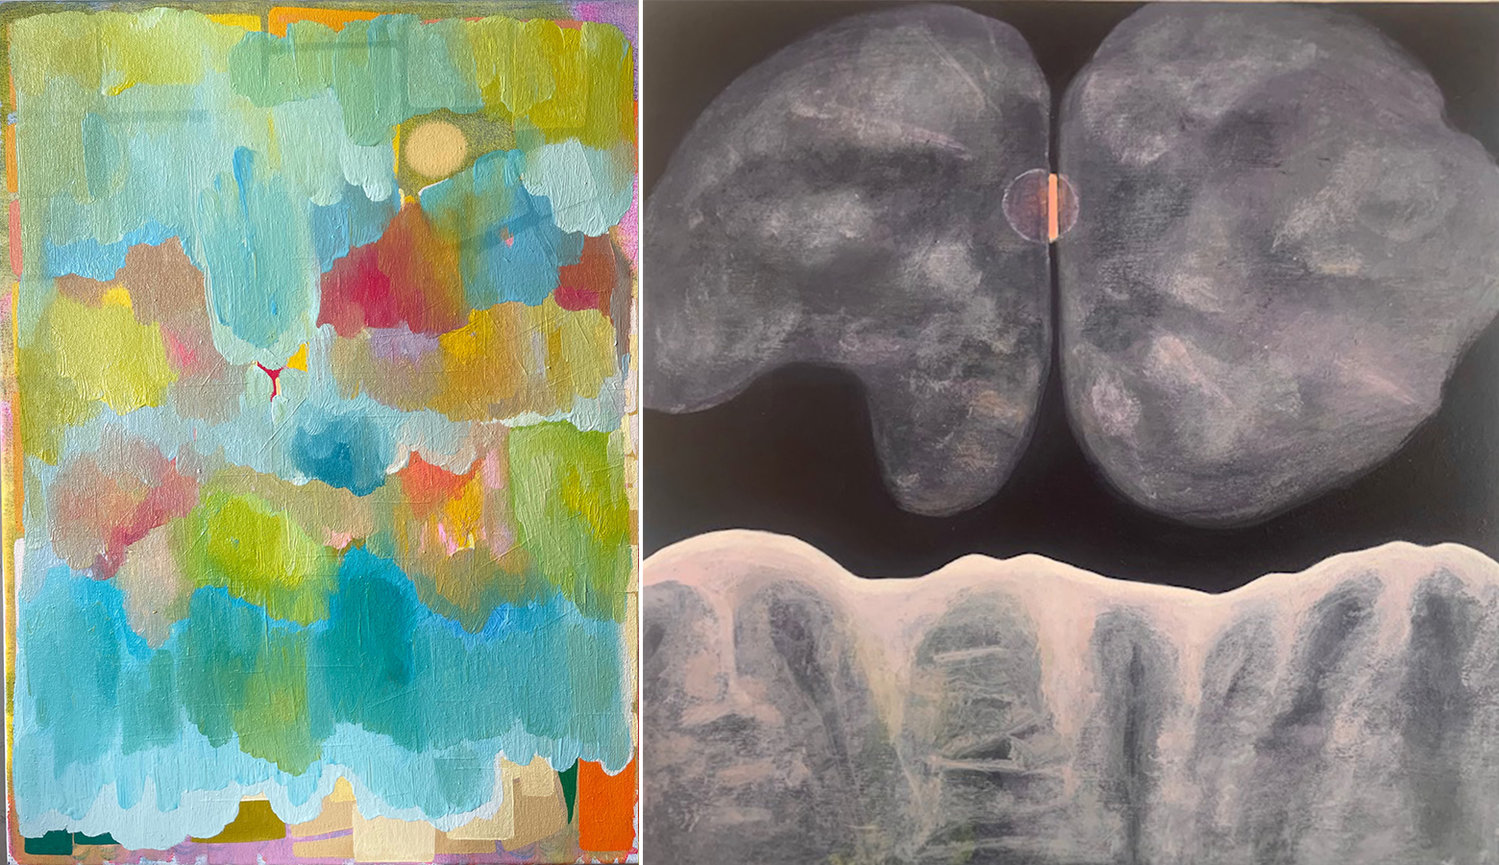 Saira McLaren, Afternoon, 2023, 24 x 18 inches, oil and dye on canvas. Right: Nancy Diamond, night brain, 2023, 16 x 16 inches, acrylic gouache on wood panel.